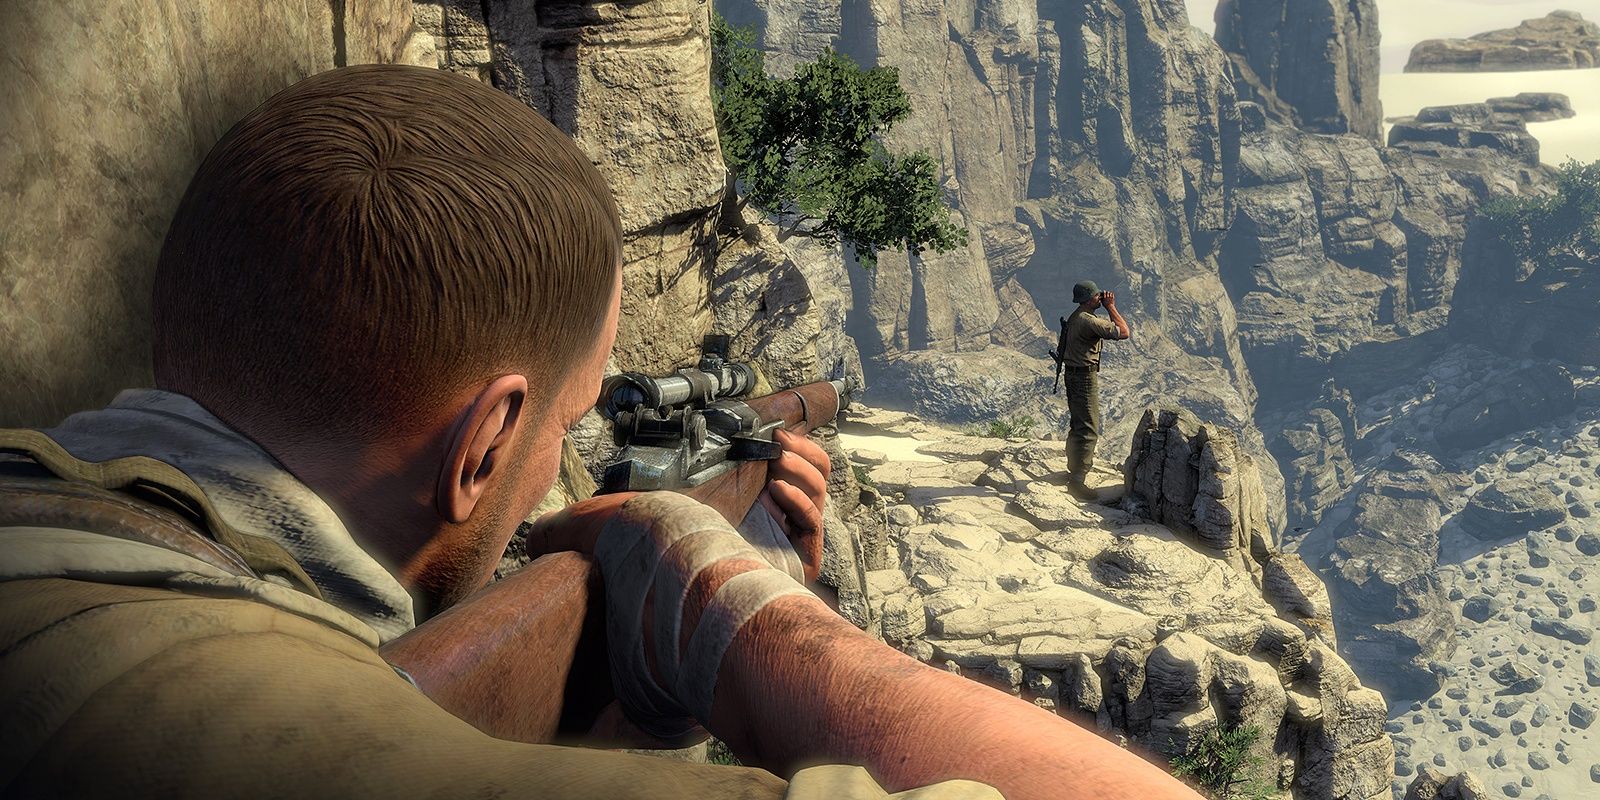 A sniper lines up a shot on an unwitting enemy.